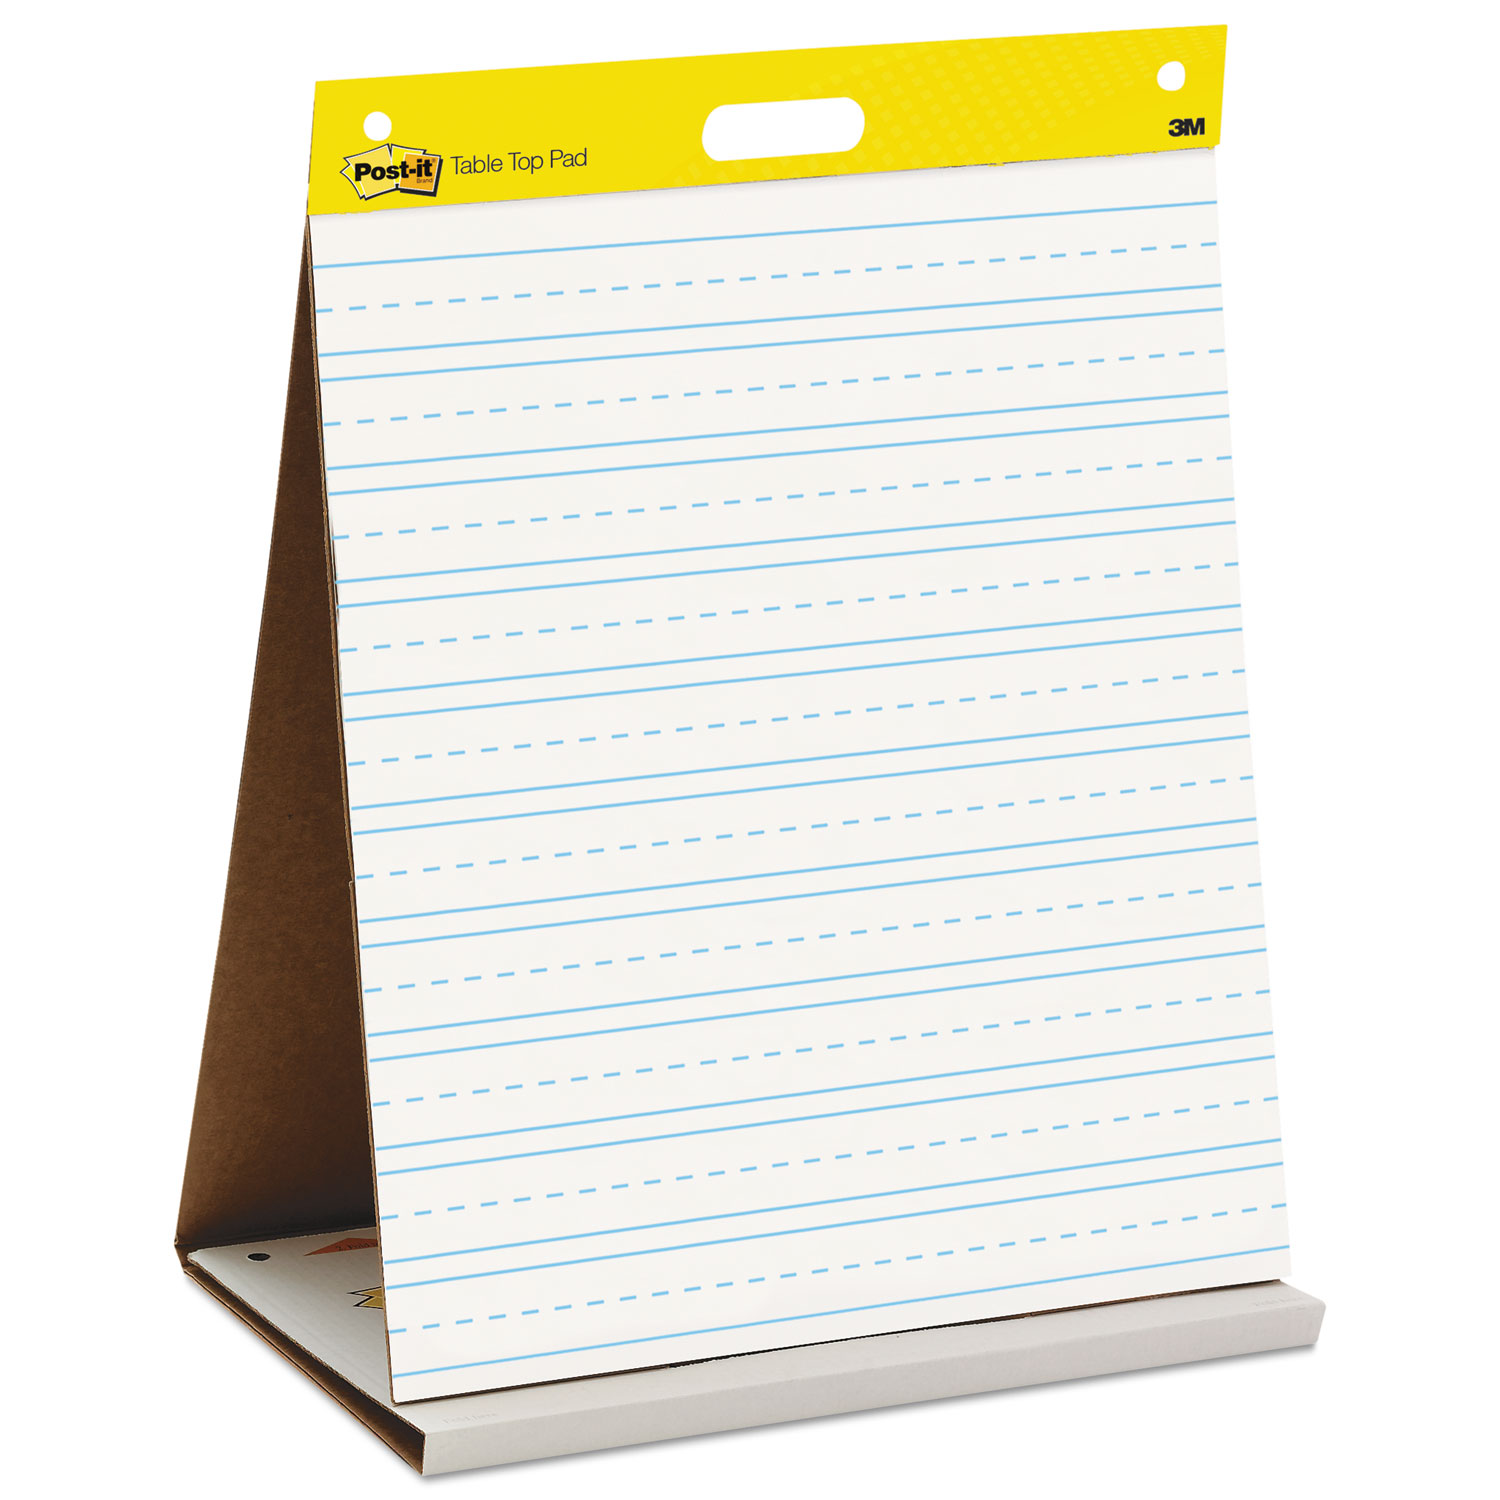  Post-it Easel Pads Super Sticky 563PRL Self-Stick Tabletop Easel Pad with Command Strips and Ruled Sheets, 20 x 23, White, 20 Sheets (MMM563PRL) 